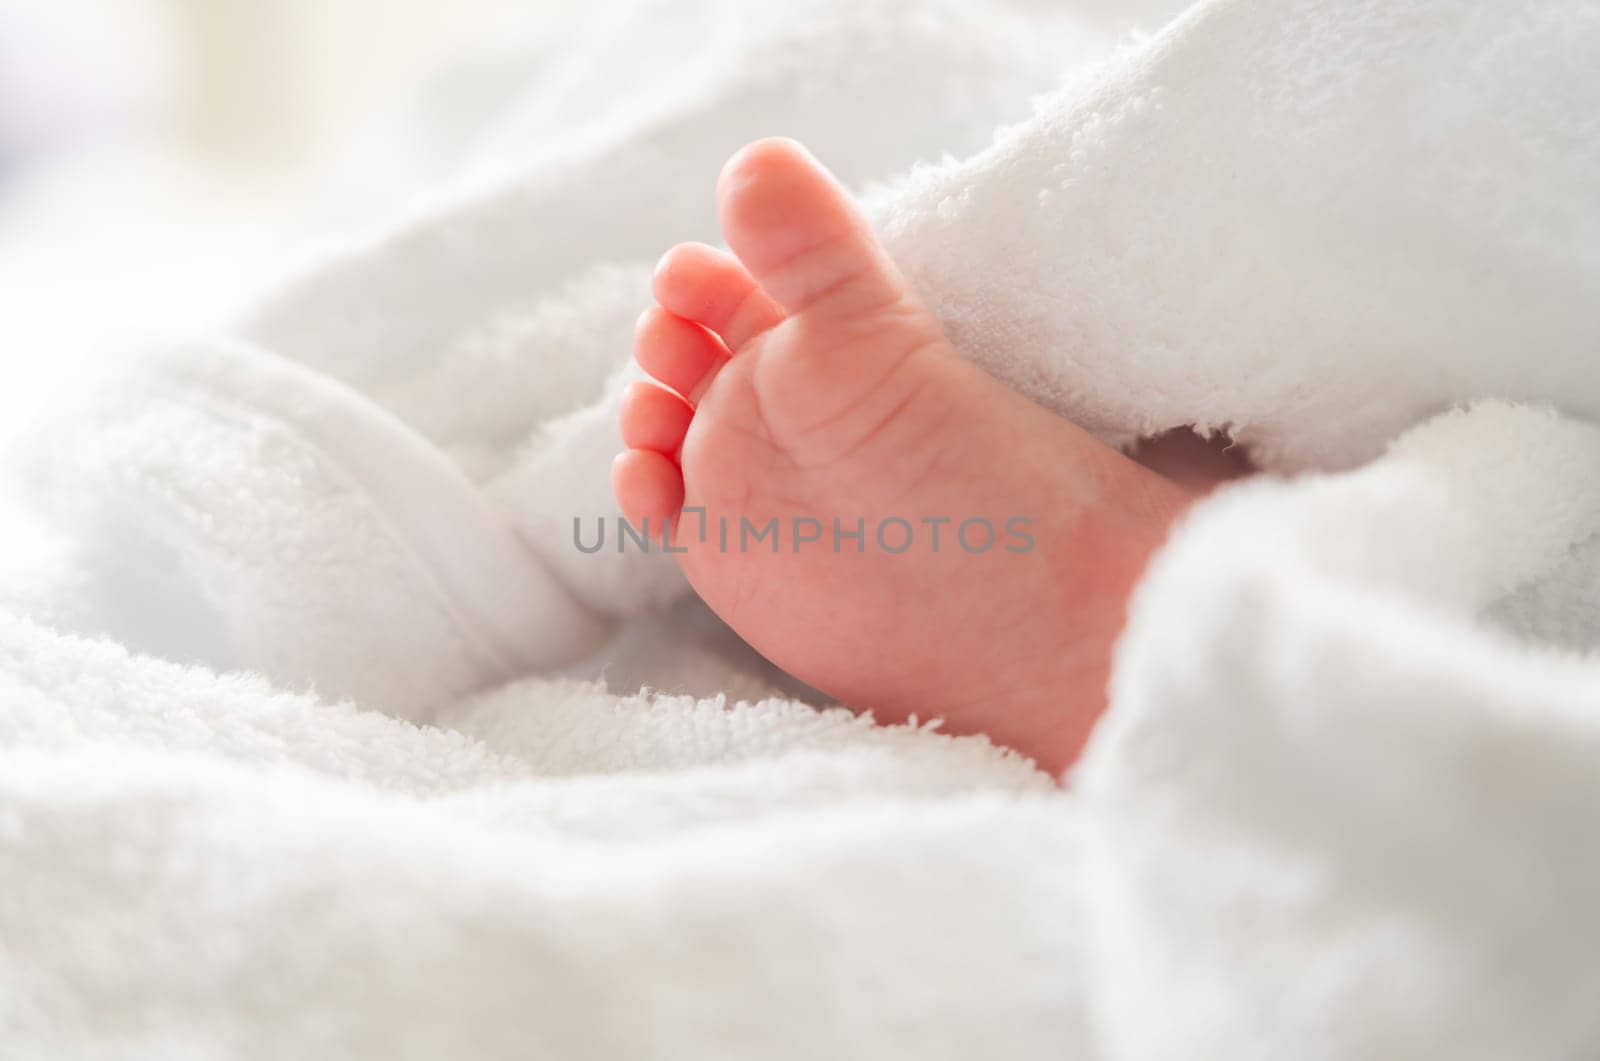 Fresh from a bath, the delicate foot of a newborn baby peeks gently from under a soft white towel, signifying pure moments of care